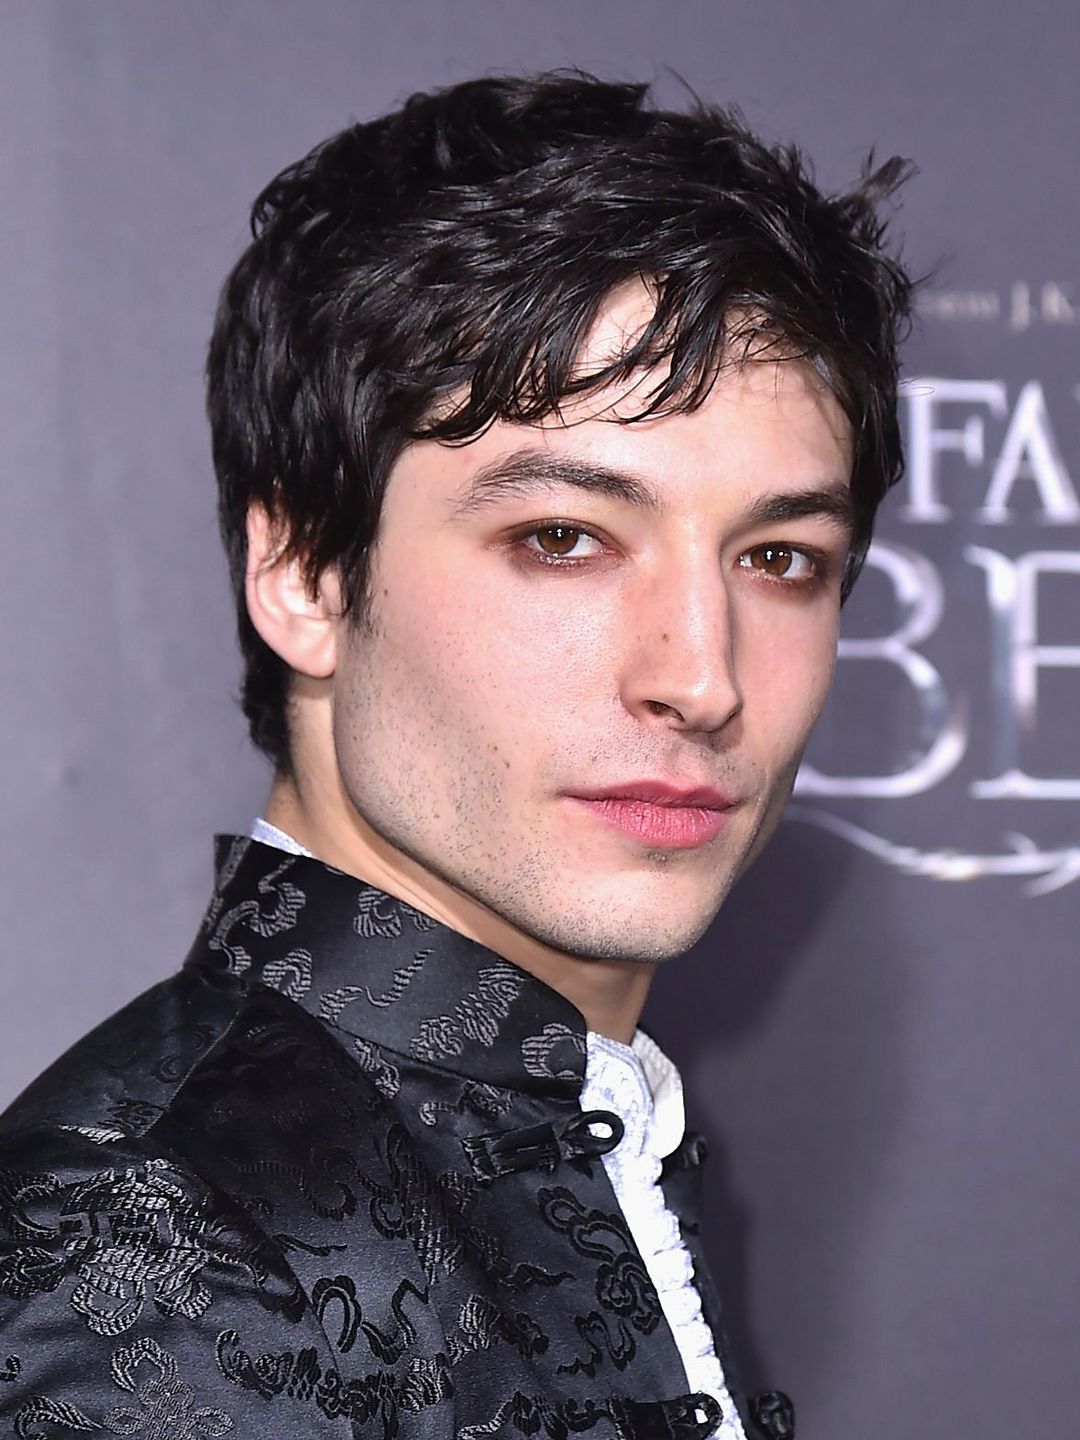 Ezra Miller how did he became famous